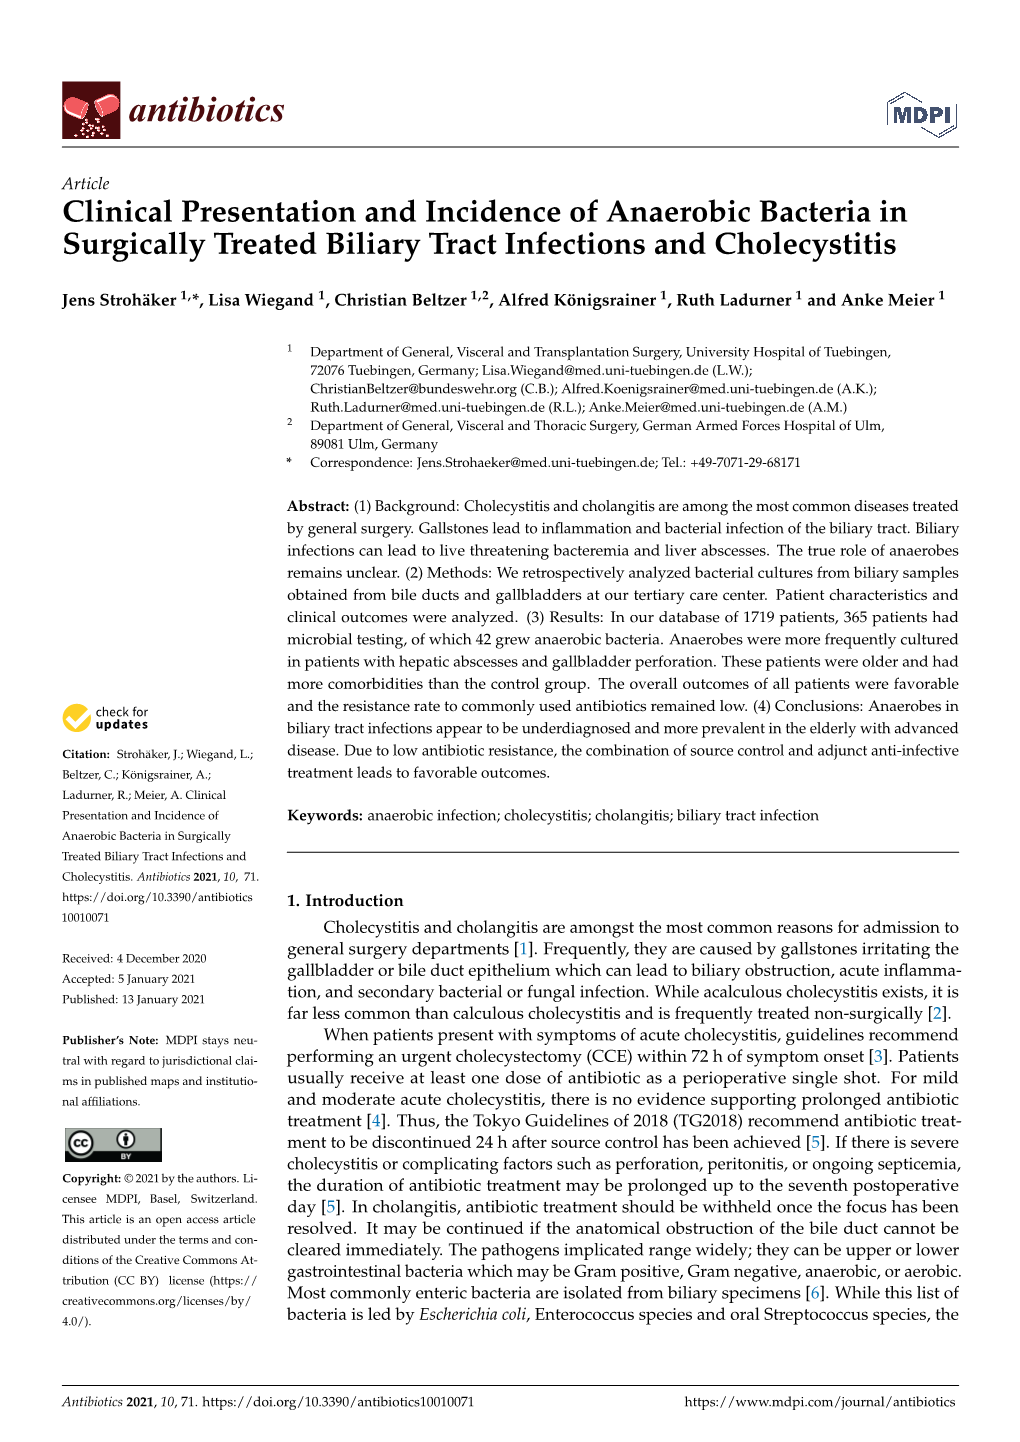 Clinical Presentation and Incidence of Anaerobic Bacteria in Surgically Treated Biliary Tract Infections and Cholecystitis